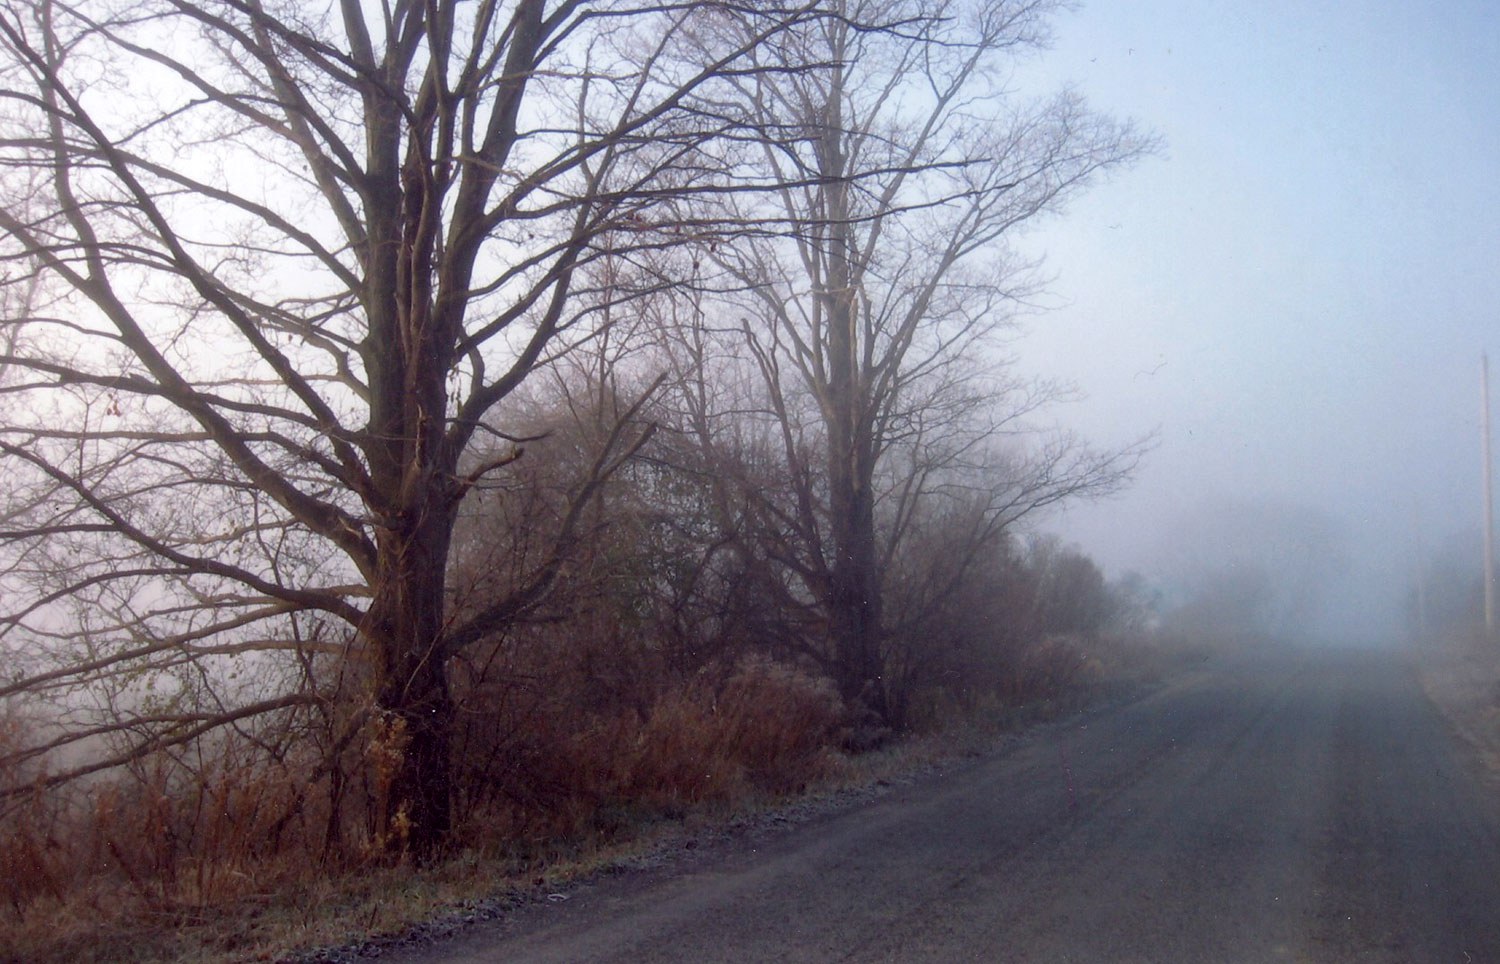 Many of Ontario’s rural roads still contain evidence of tree planting that began at the end of the 19th century. Replacement planting of these mature trees will ensure the continuation of the special character of this rural roadscape.